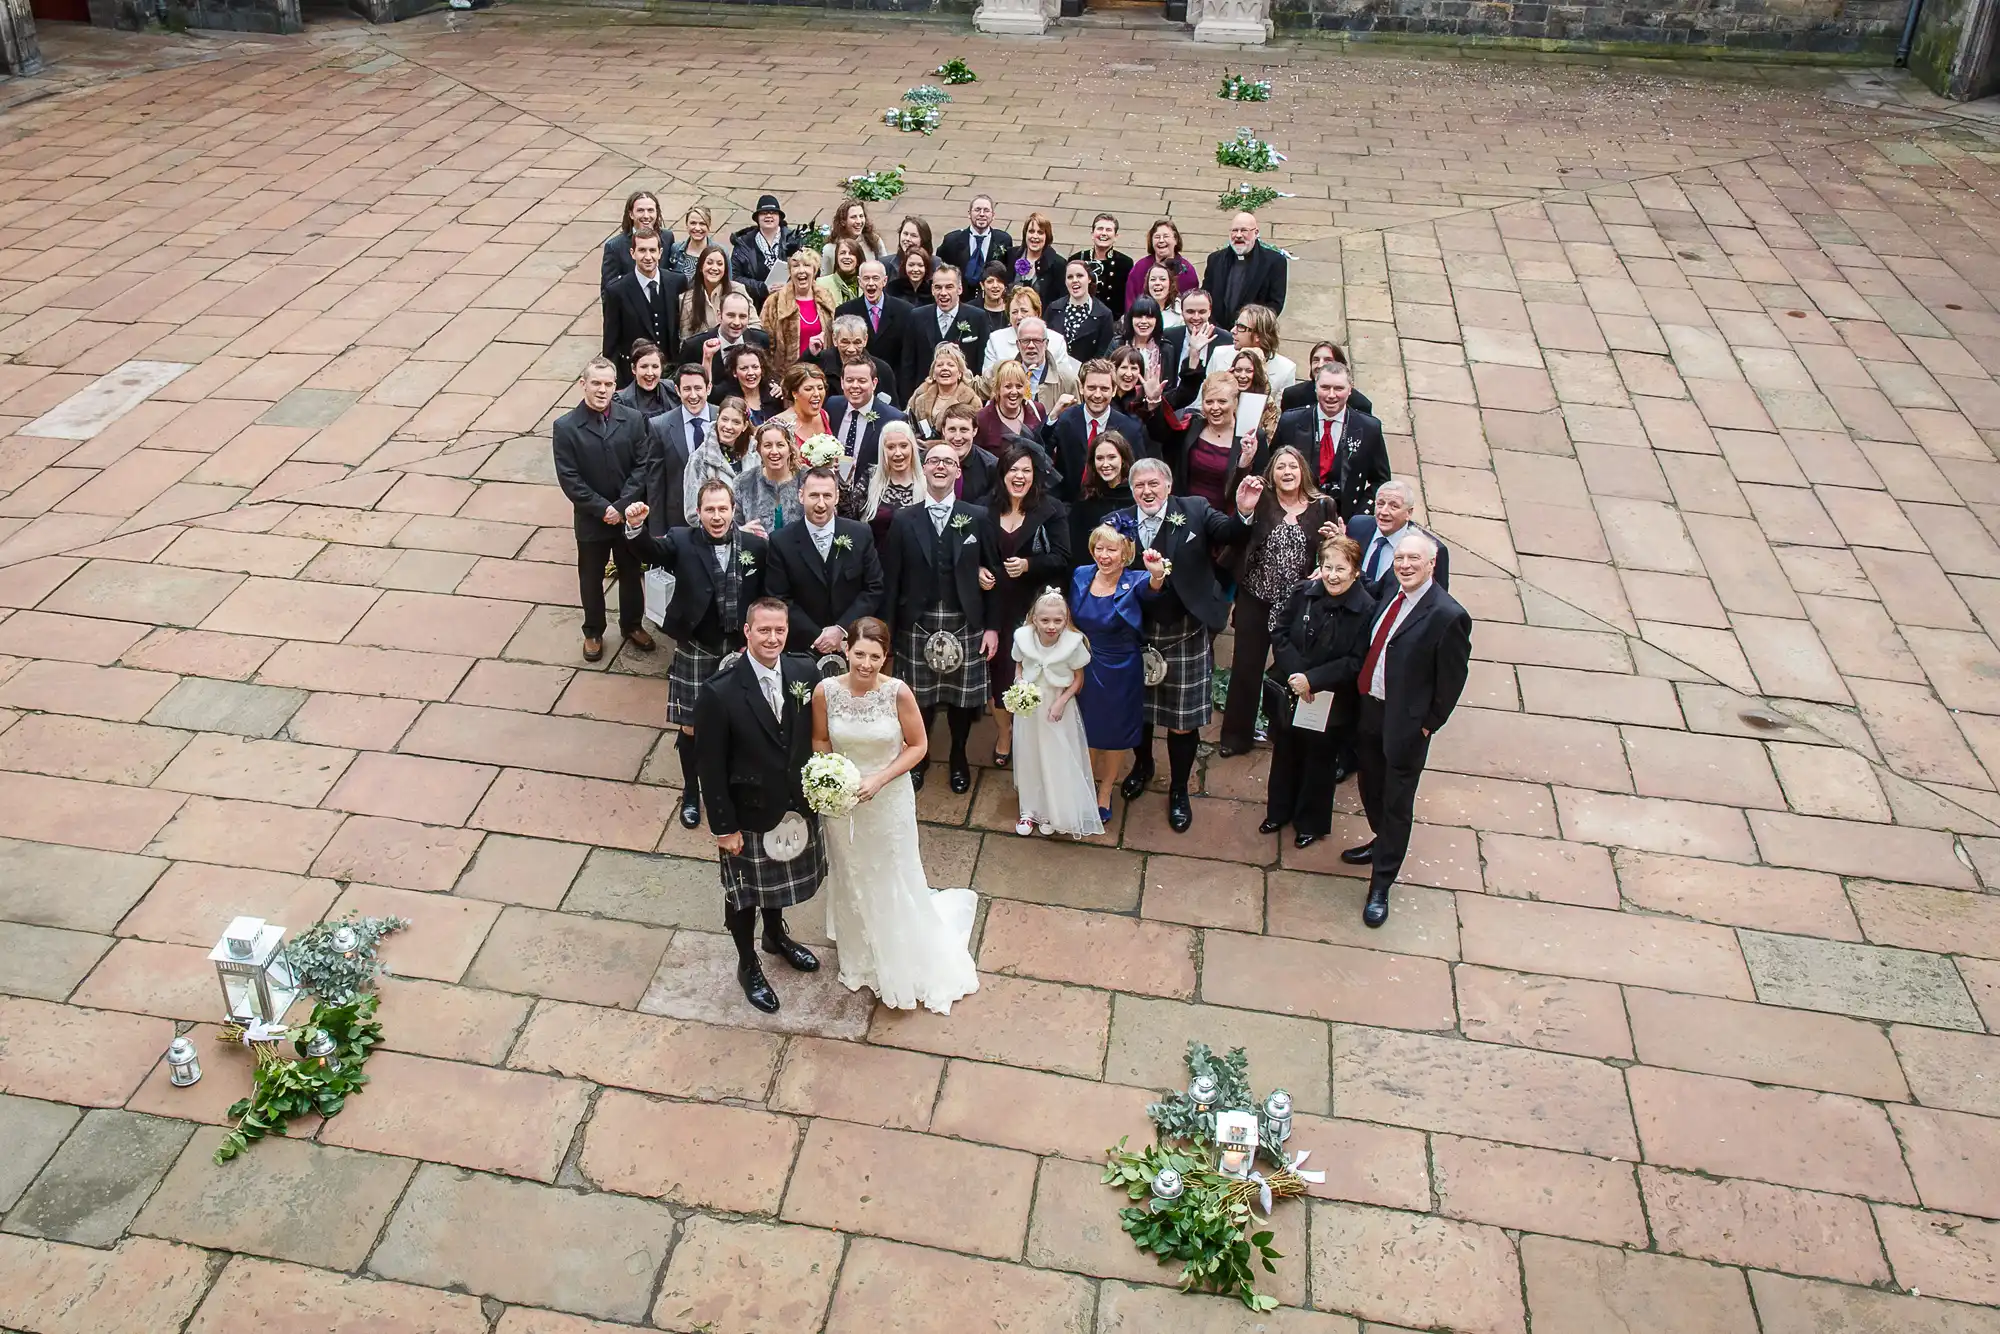 Aerial view of a large wedding group posing in a courtyard, with the bride and groom at the front center.